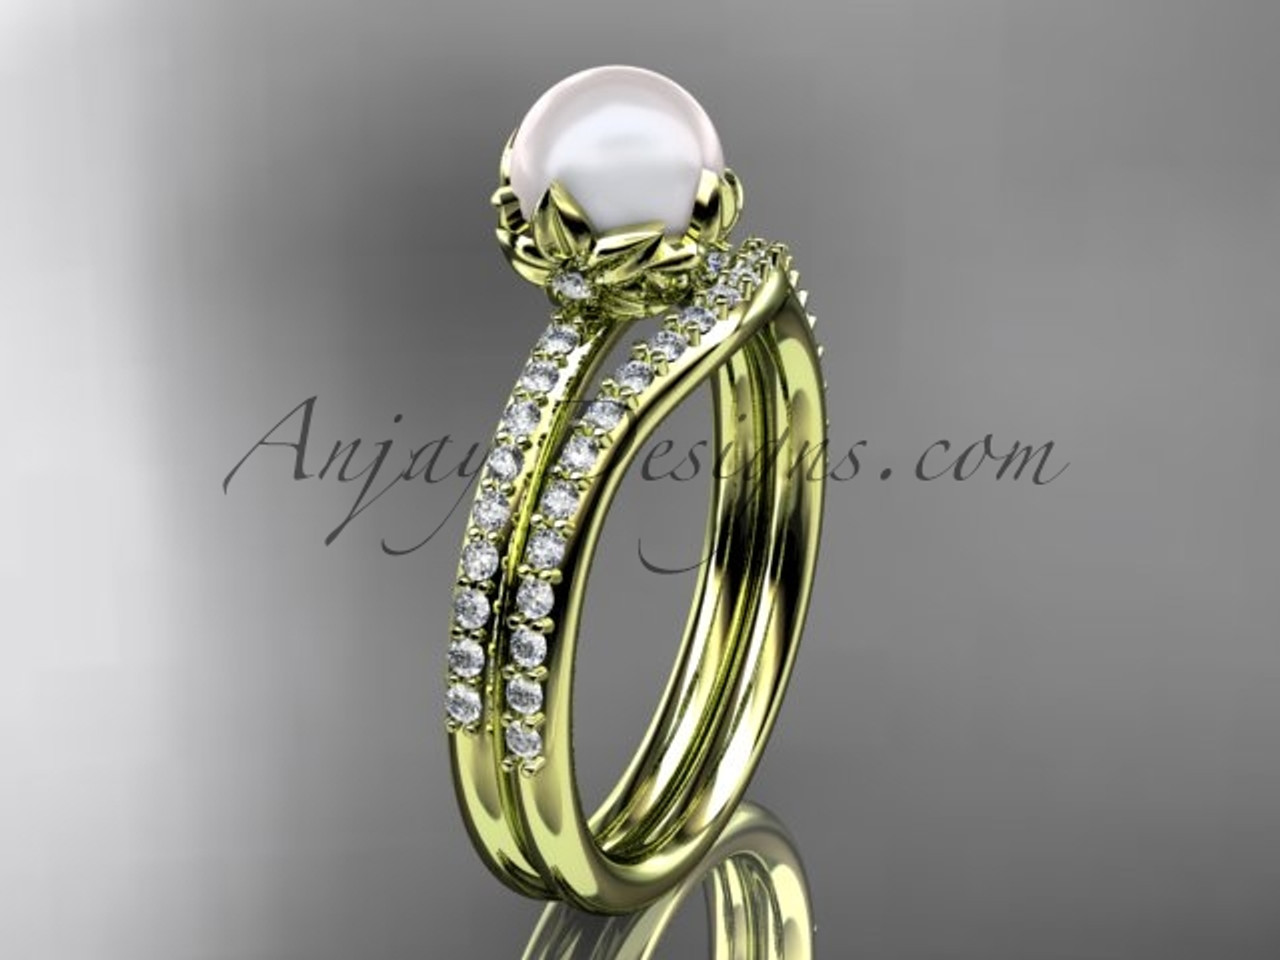 Band Style Plain Gold Ring for Women 3D Model - 3D Jewelry